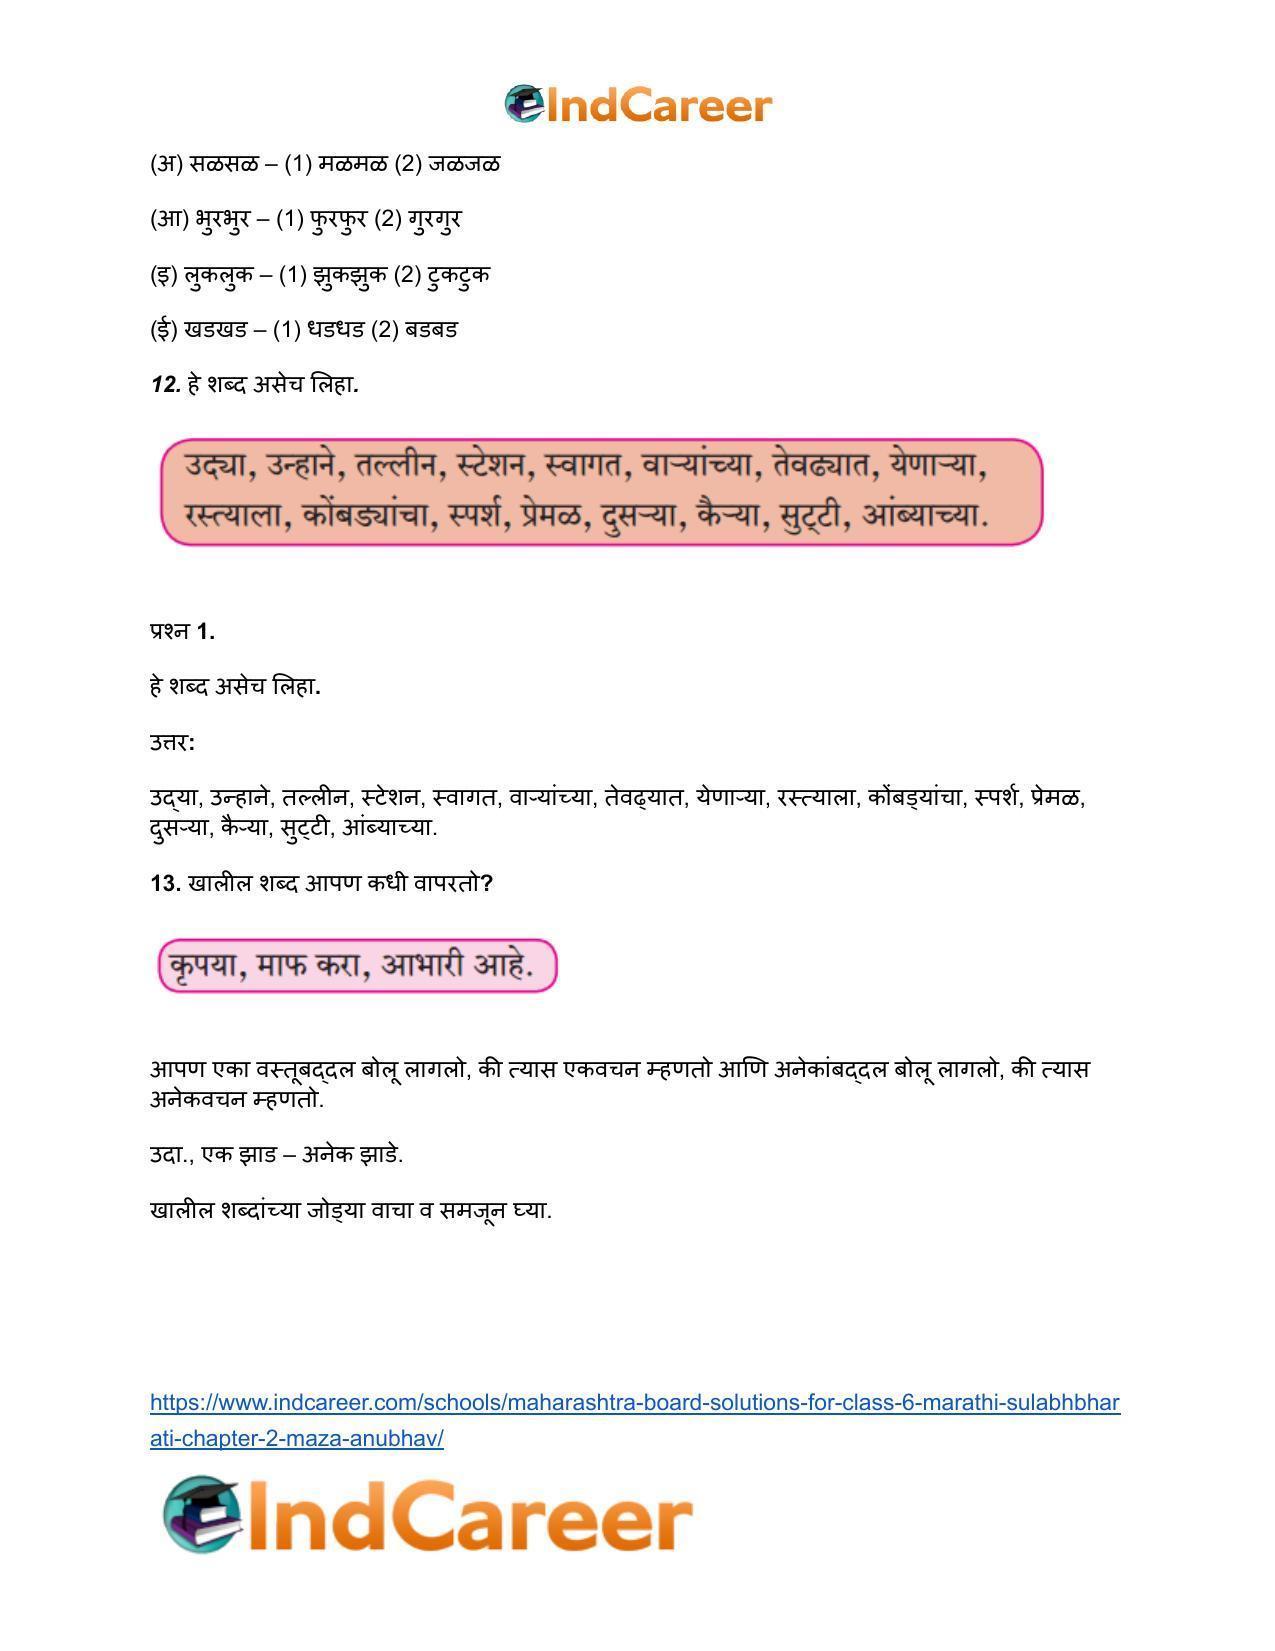 Maharashtra Board Solutions for Class 6- Marathi Sulabhbharati: Chapter 2- माझा अनुभव - Page 8